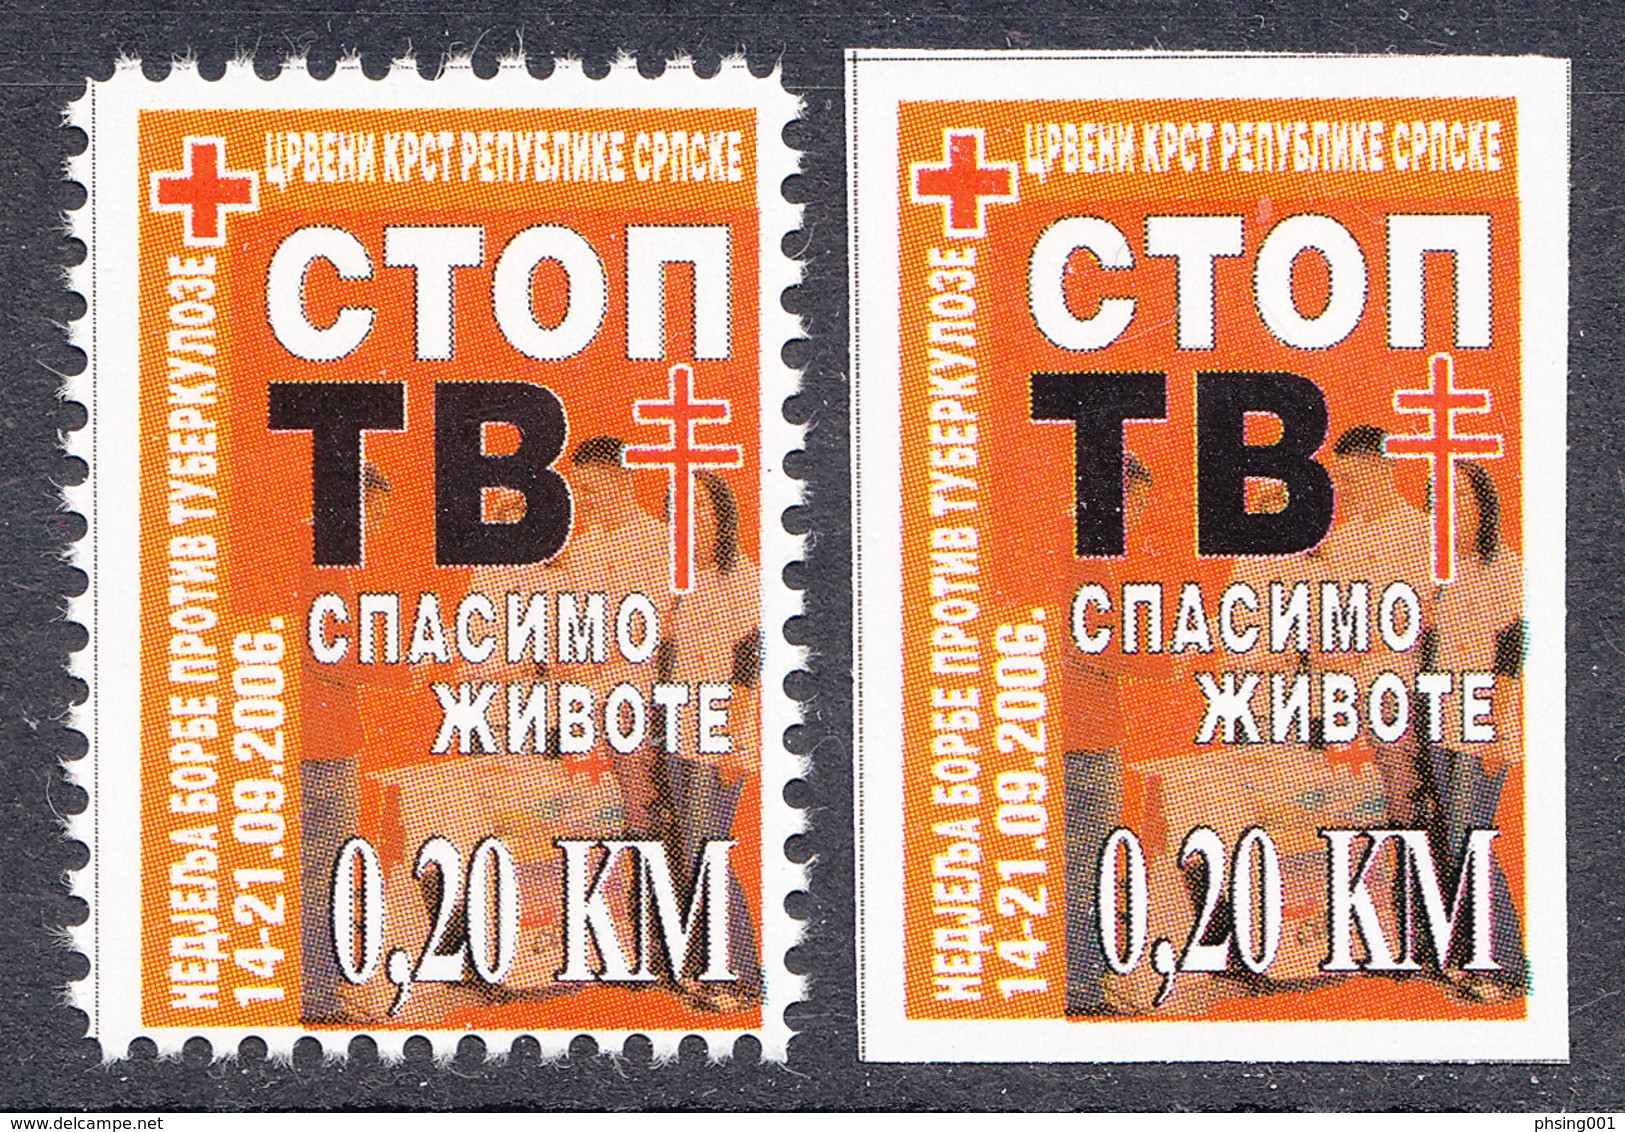 Bosnia Serbia 2006 TBC, Red Cross Rotes Kreuz Croix Rouge, Tax Charity Surcharge, Perforated + Imperforated Stamp MNH - Bosnien-Herzegowina